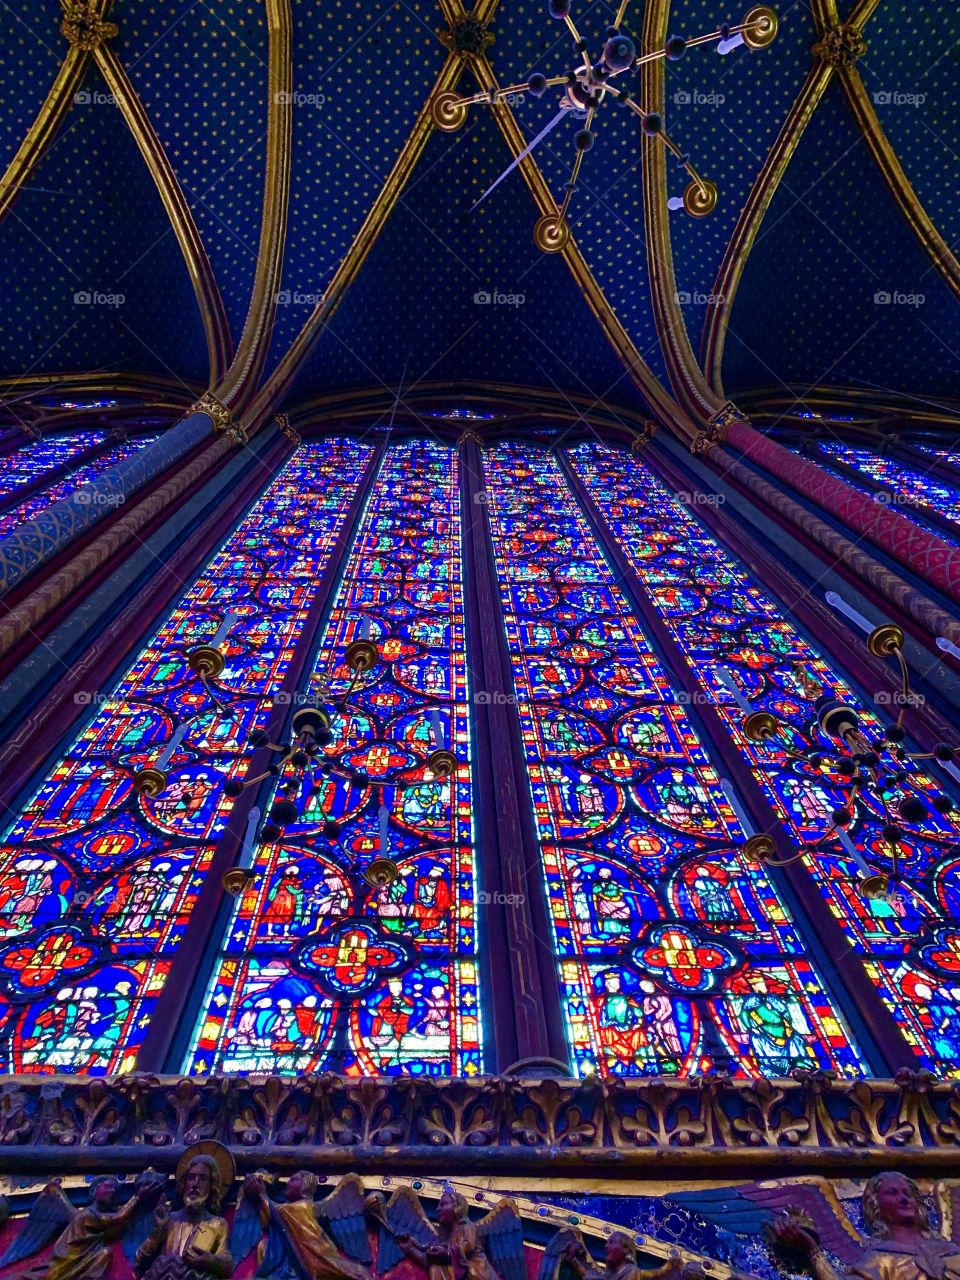 Stained glass windows in Sainte-Chapelle, Paris , France